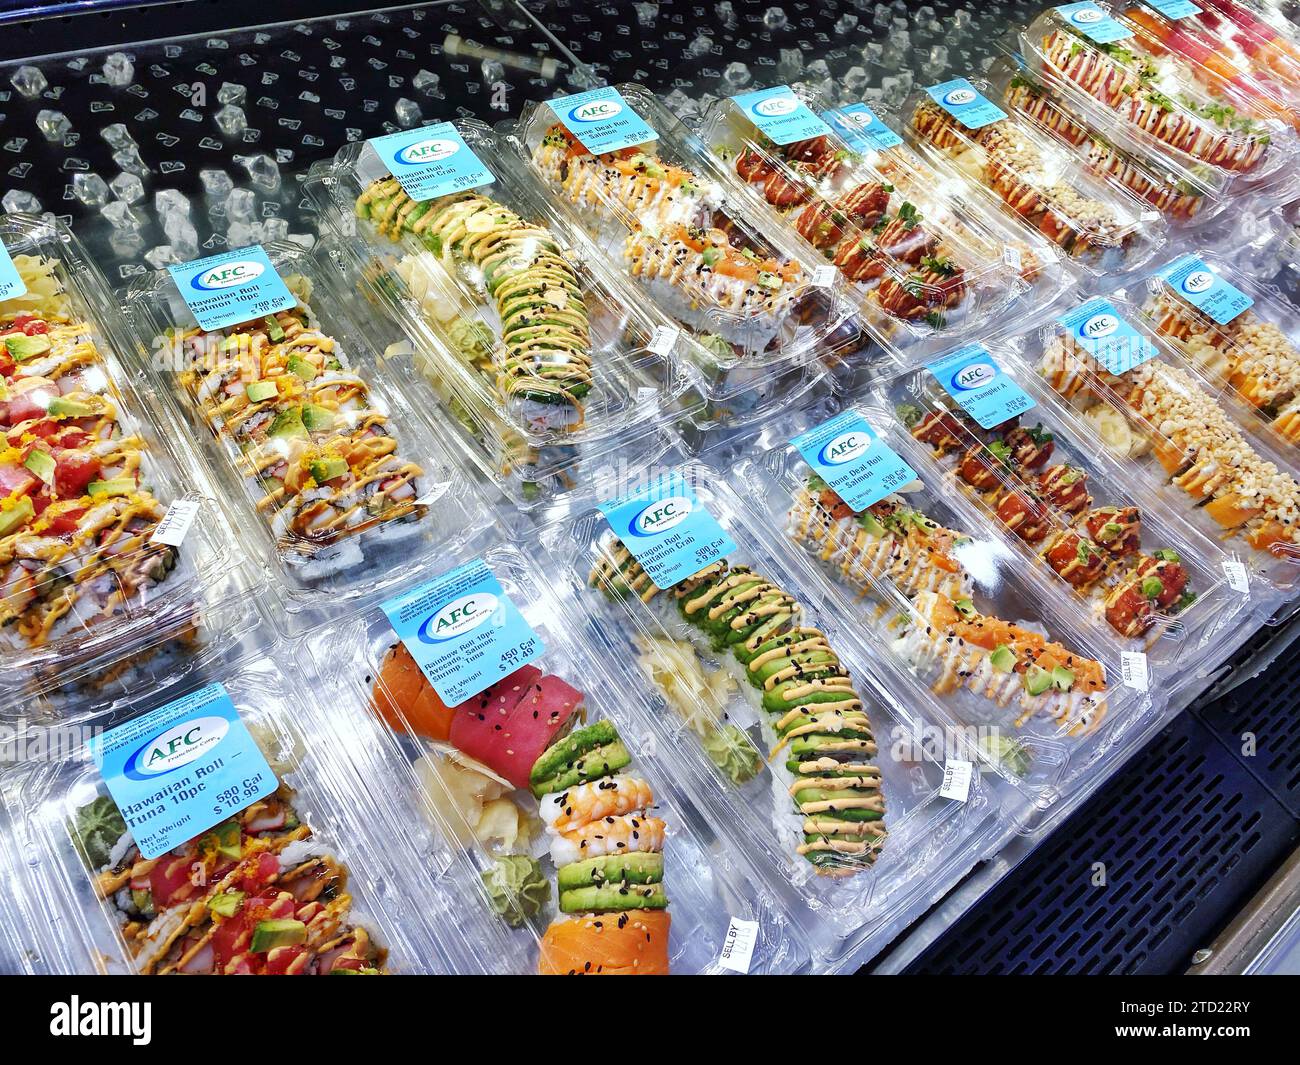 Premade prepared sushi for sale at a supermarket cooler in California, United States Stock Photo